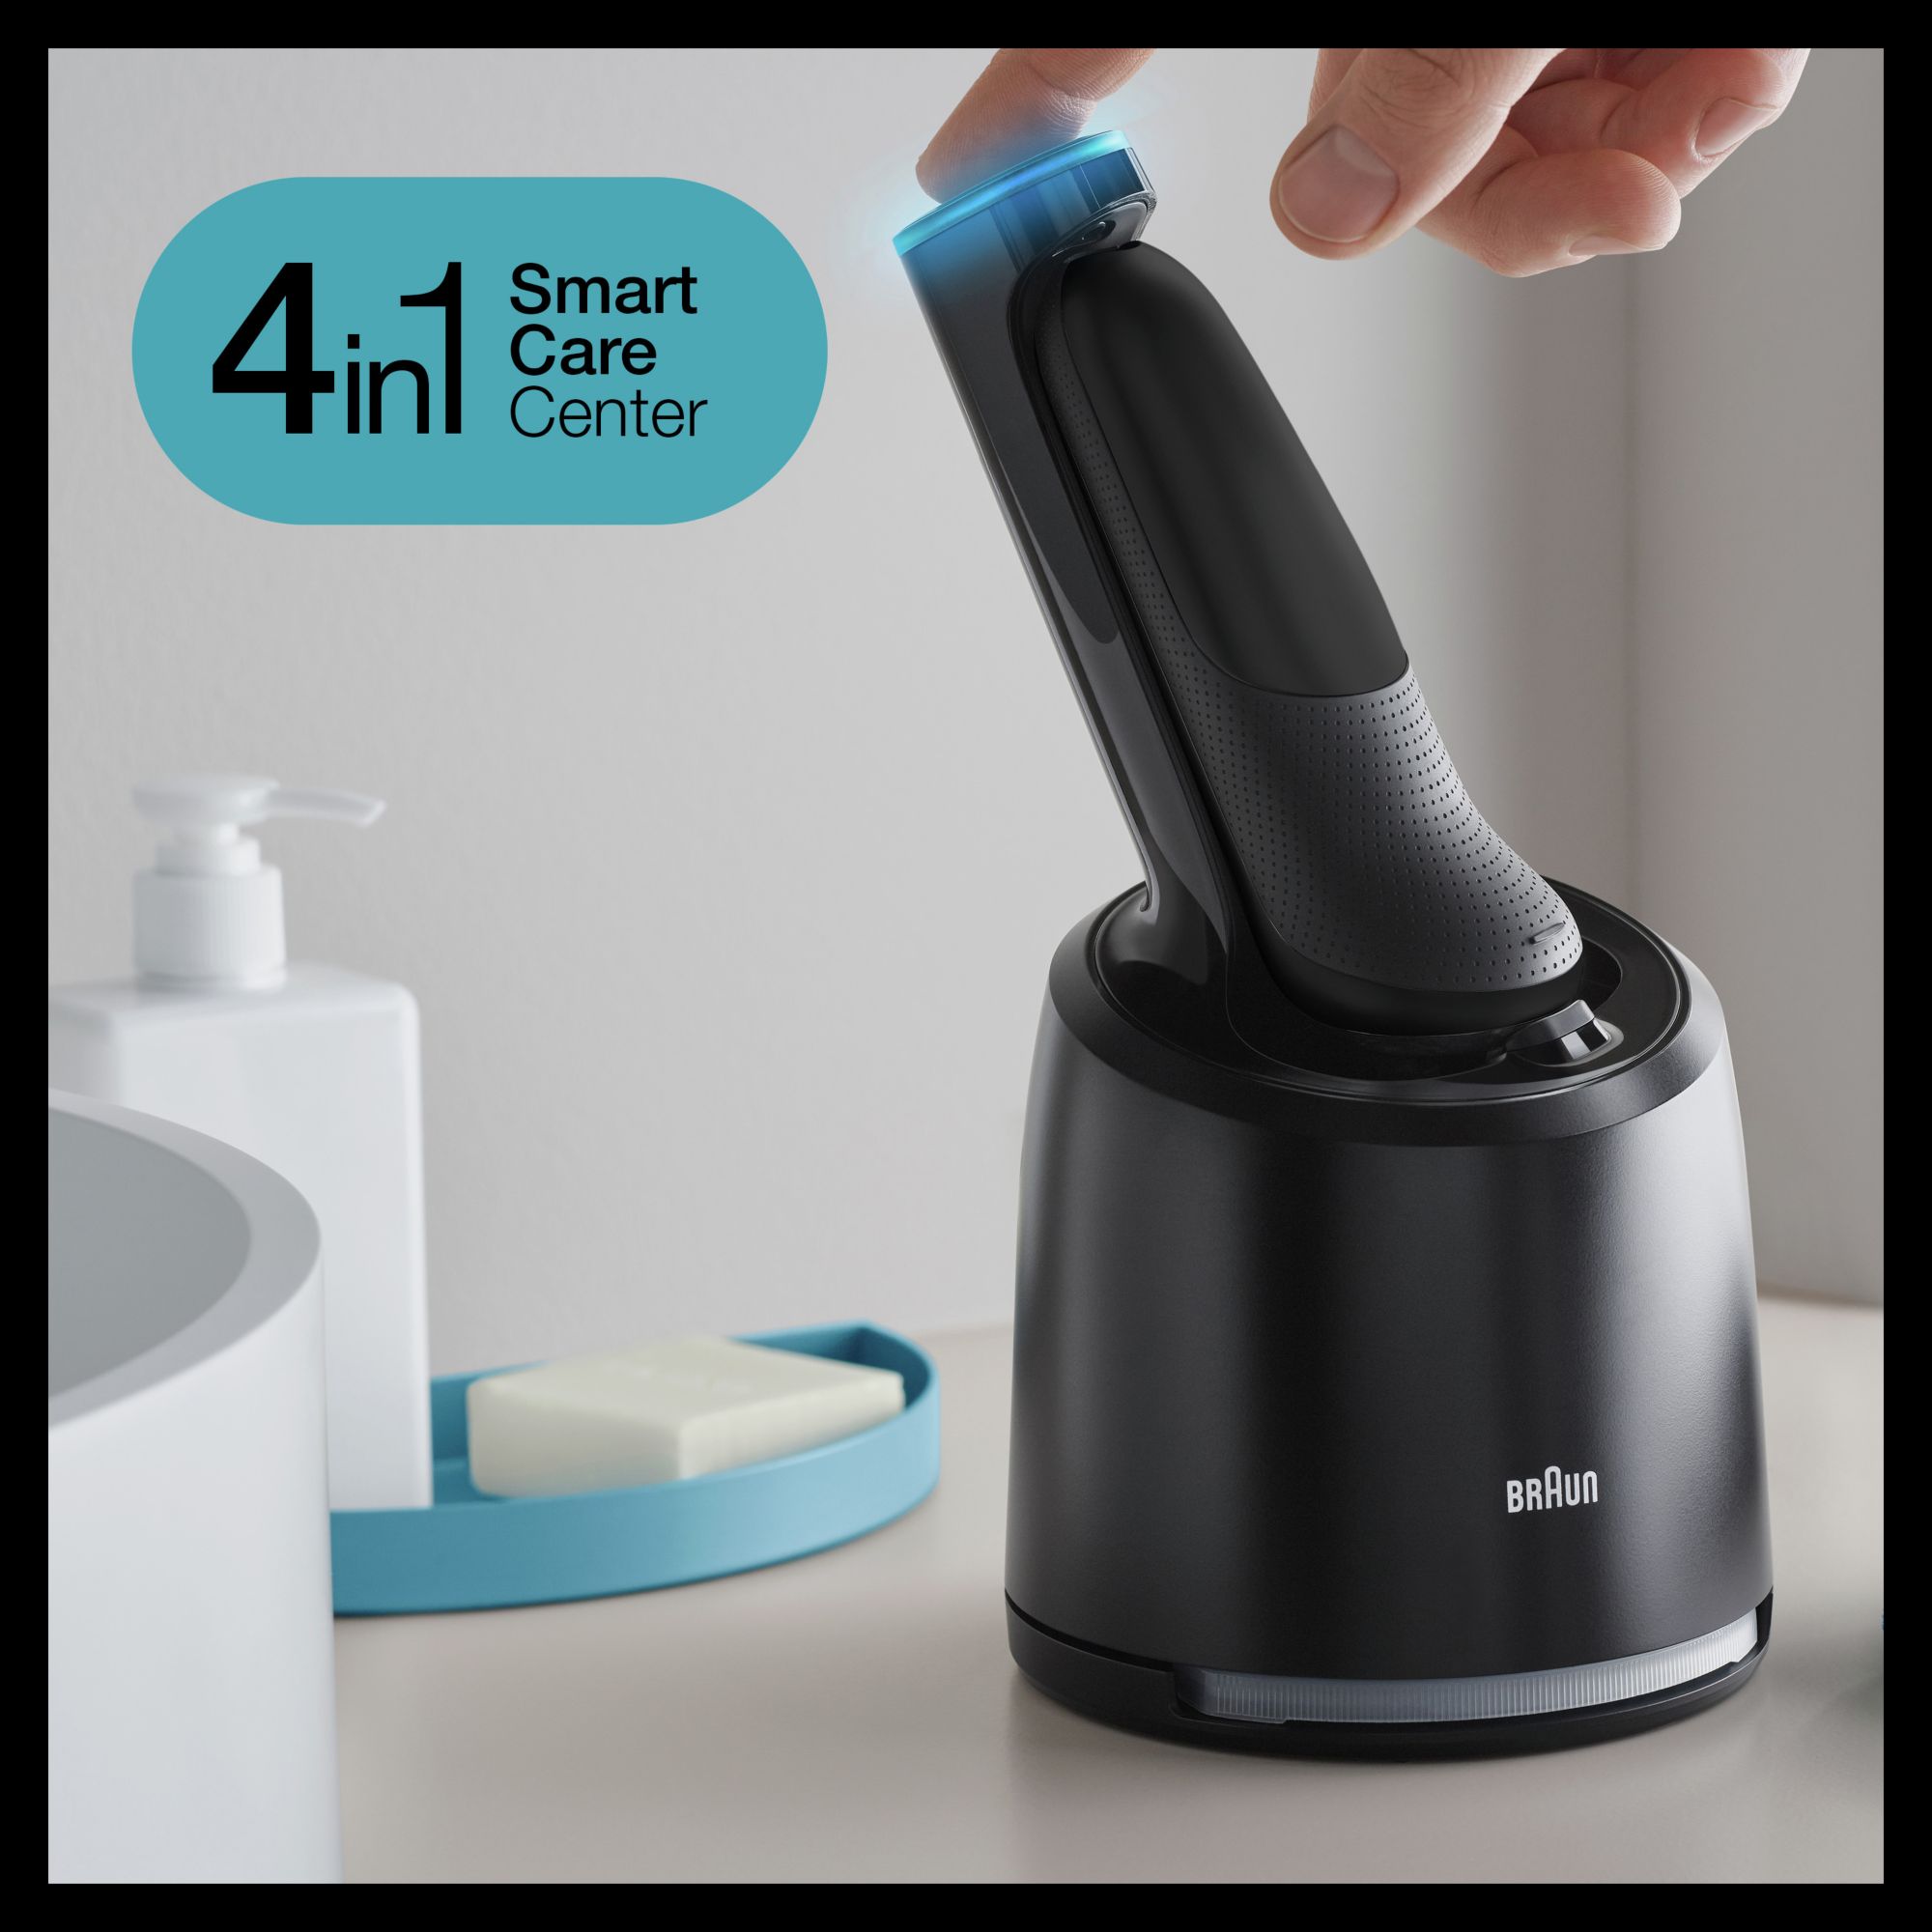 BRAUN Series 5 Shaver 4 in 1 SmartCare Cleaning Center User Manual